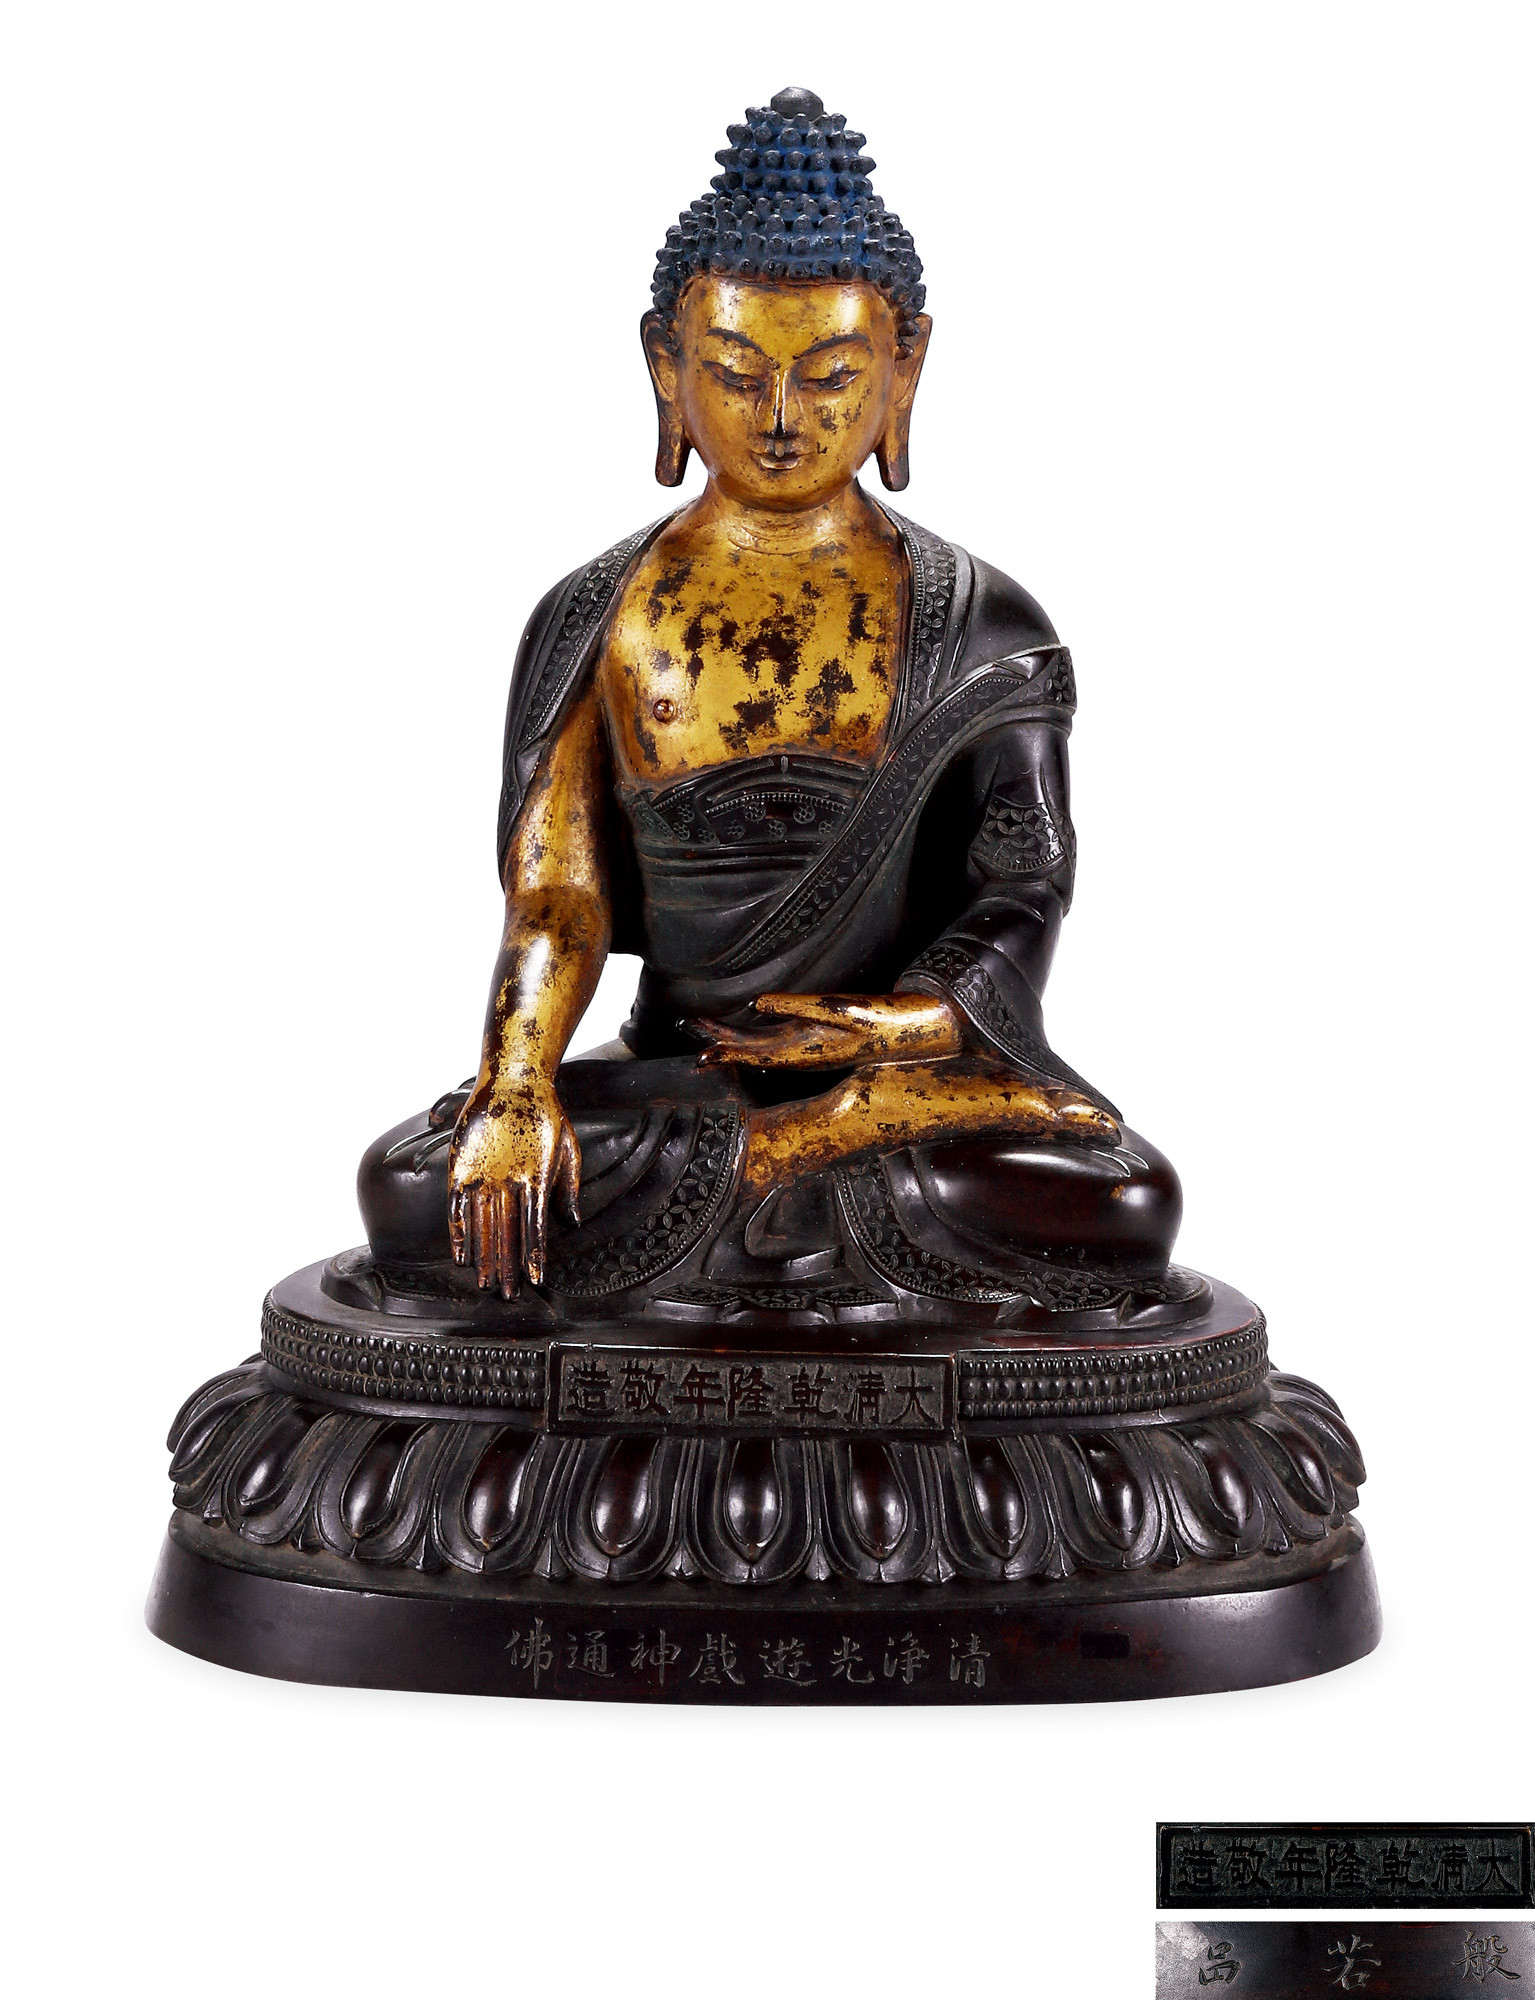 A STATUE OF THE BUDDHA OF CLEAR AND PURE ILLUMINATON DISPORTING NUMINOUS TRANSCENDECES